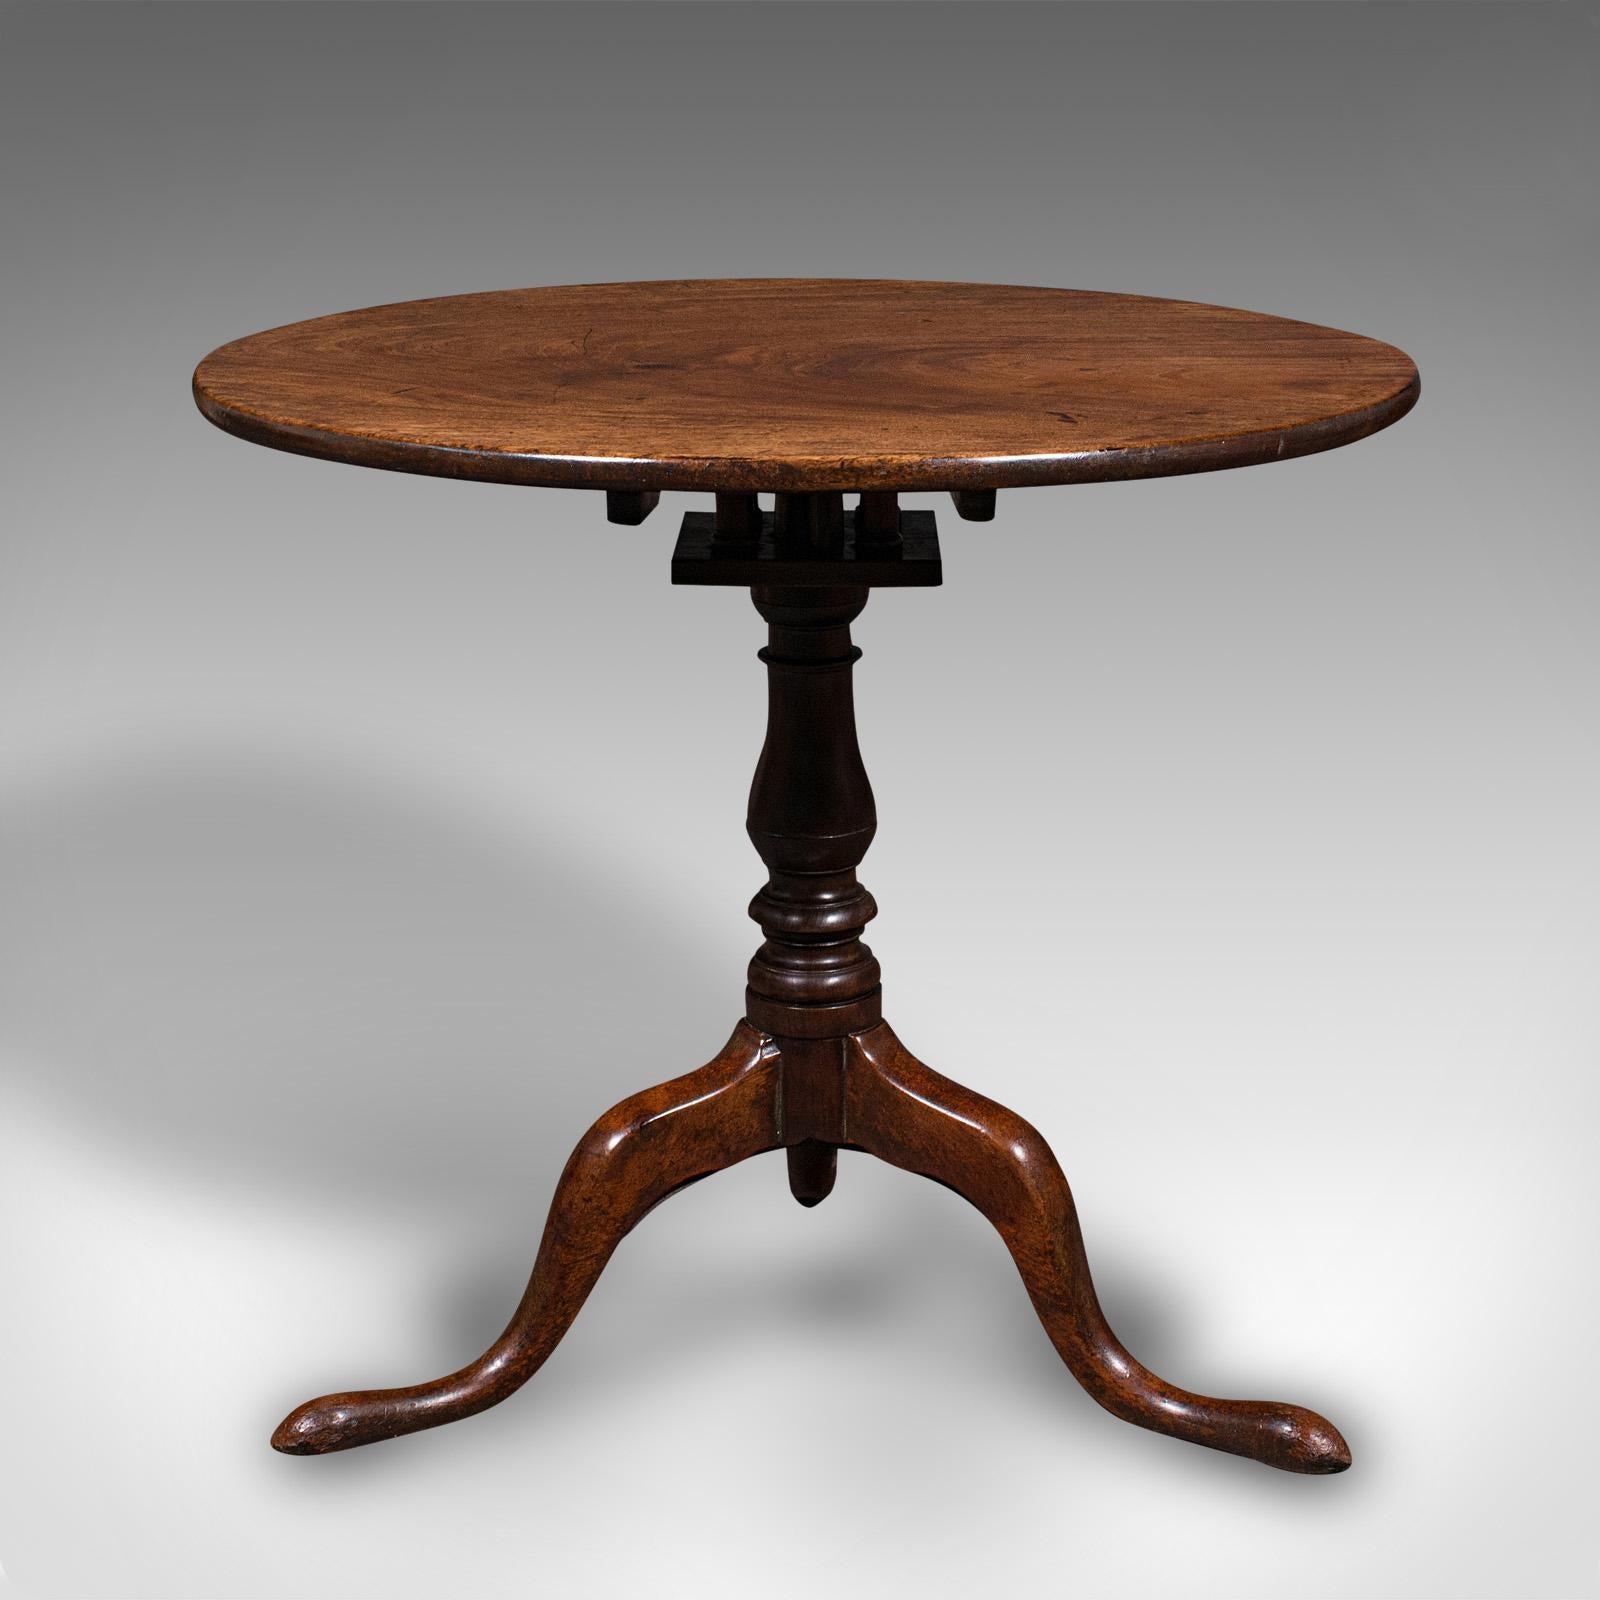 18th Century Antique Occasional Table, English, Tilt Top, Lamp, Afternoon Tea, Georgian, 1800 For Sale